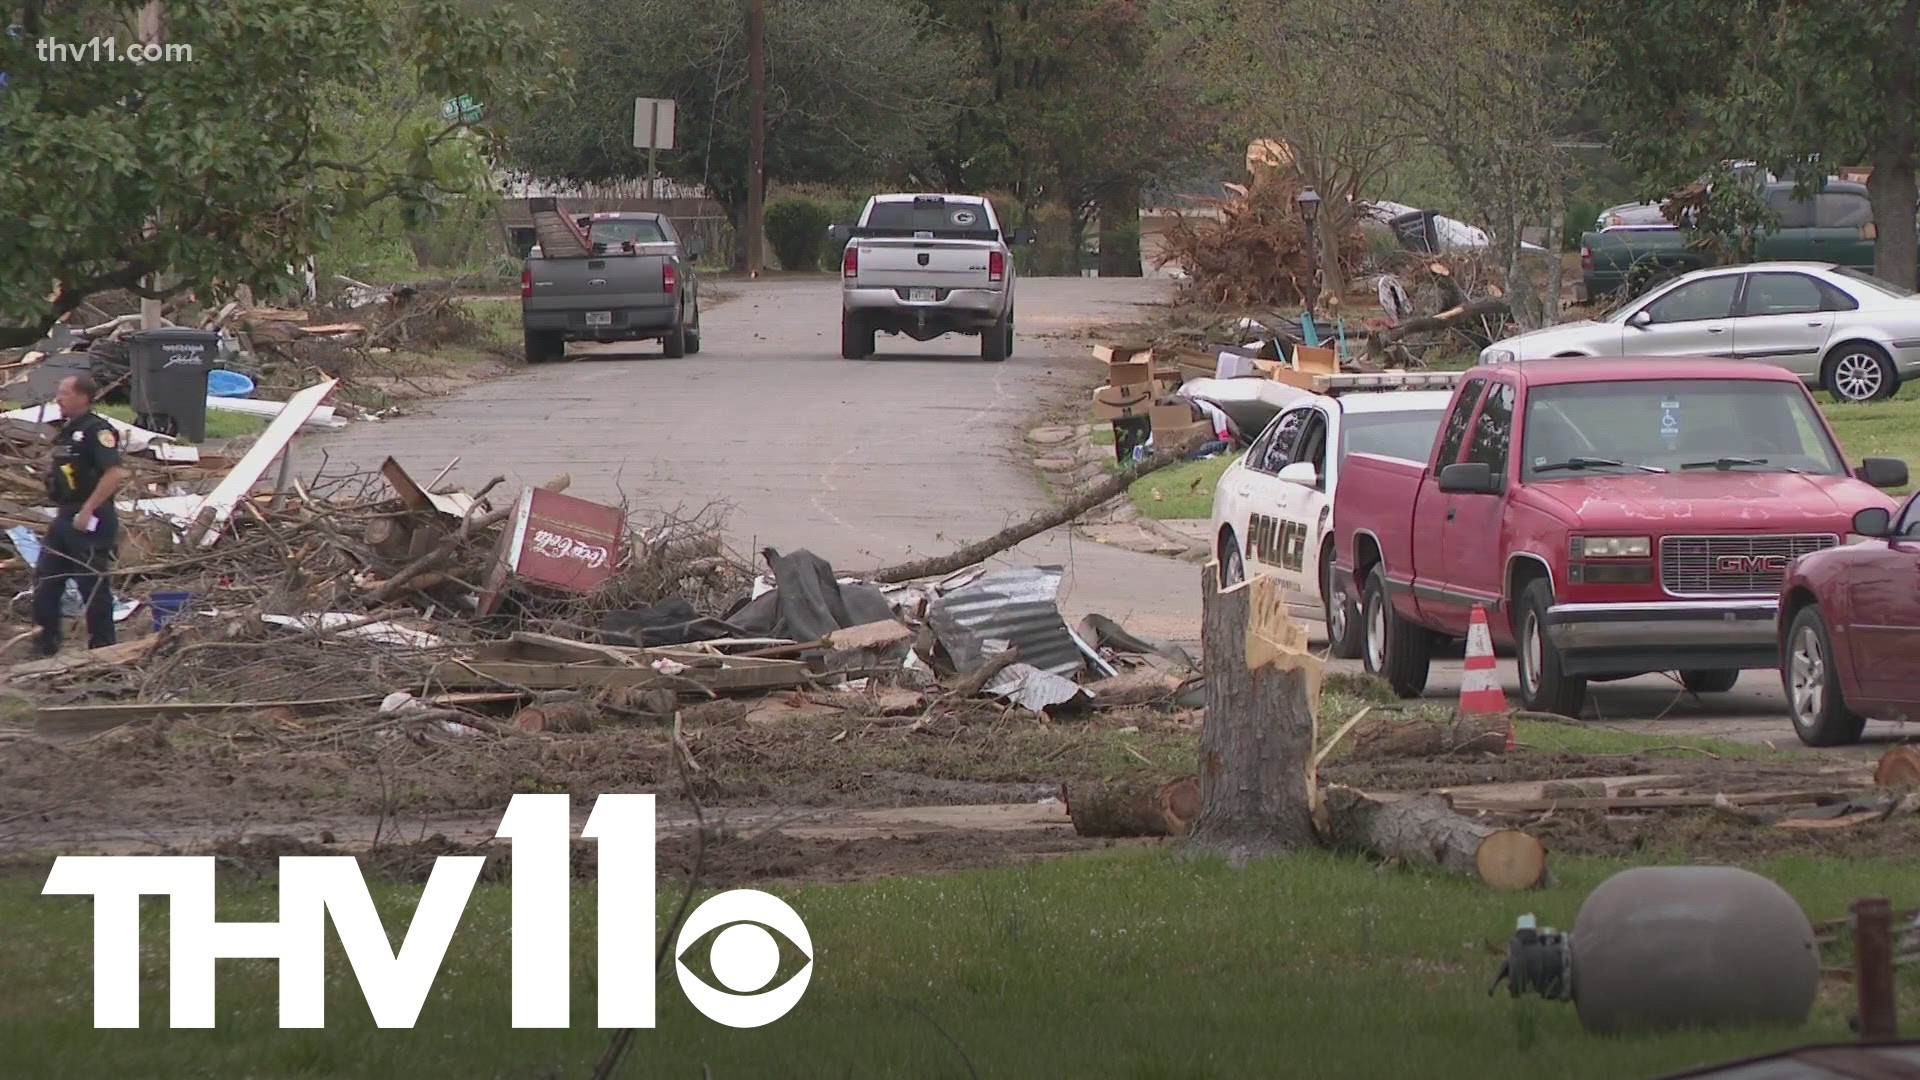 Jacksonville has worked to get power back on and debris off the road following the recent tornado. Now, the mayor has met with state leaders to discuss solutions.